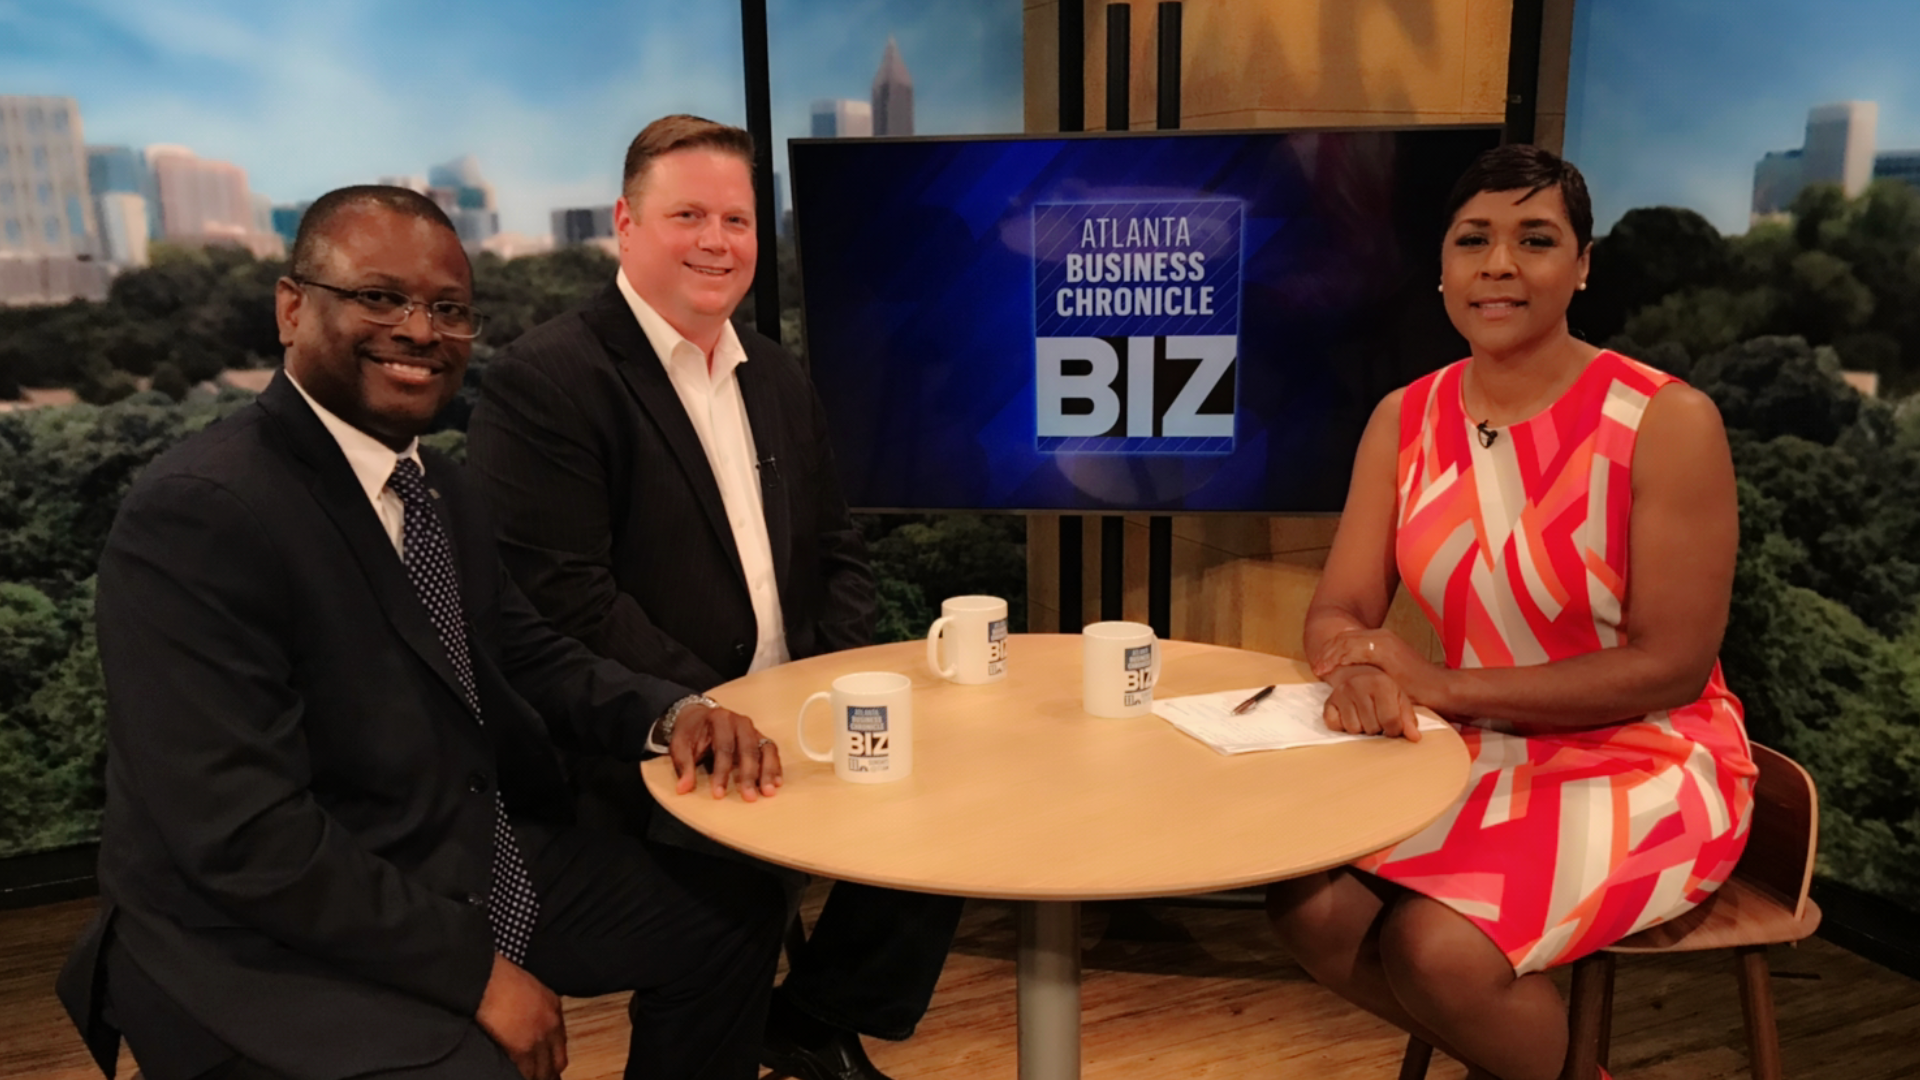 A new survey says Atlanta area entrepreneurs are more optimistic than their counterparts nationwide. Crystal Edmonson talks small business with Bank of America and Amalfi Pizza.